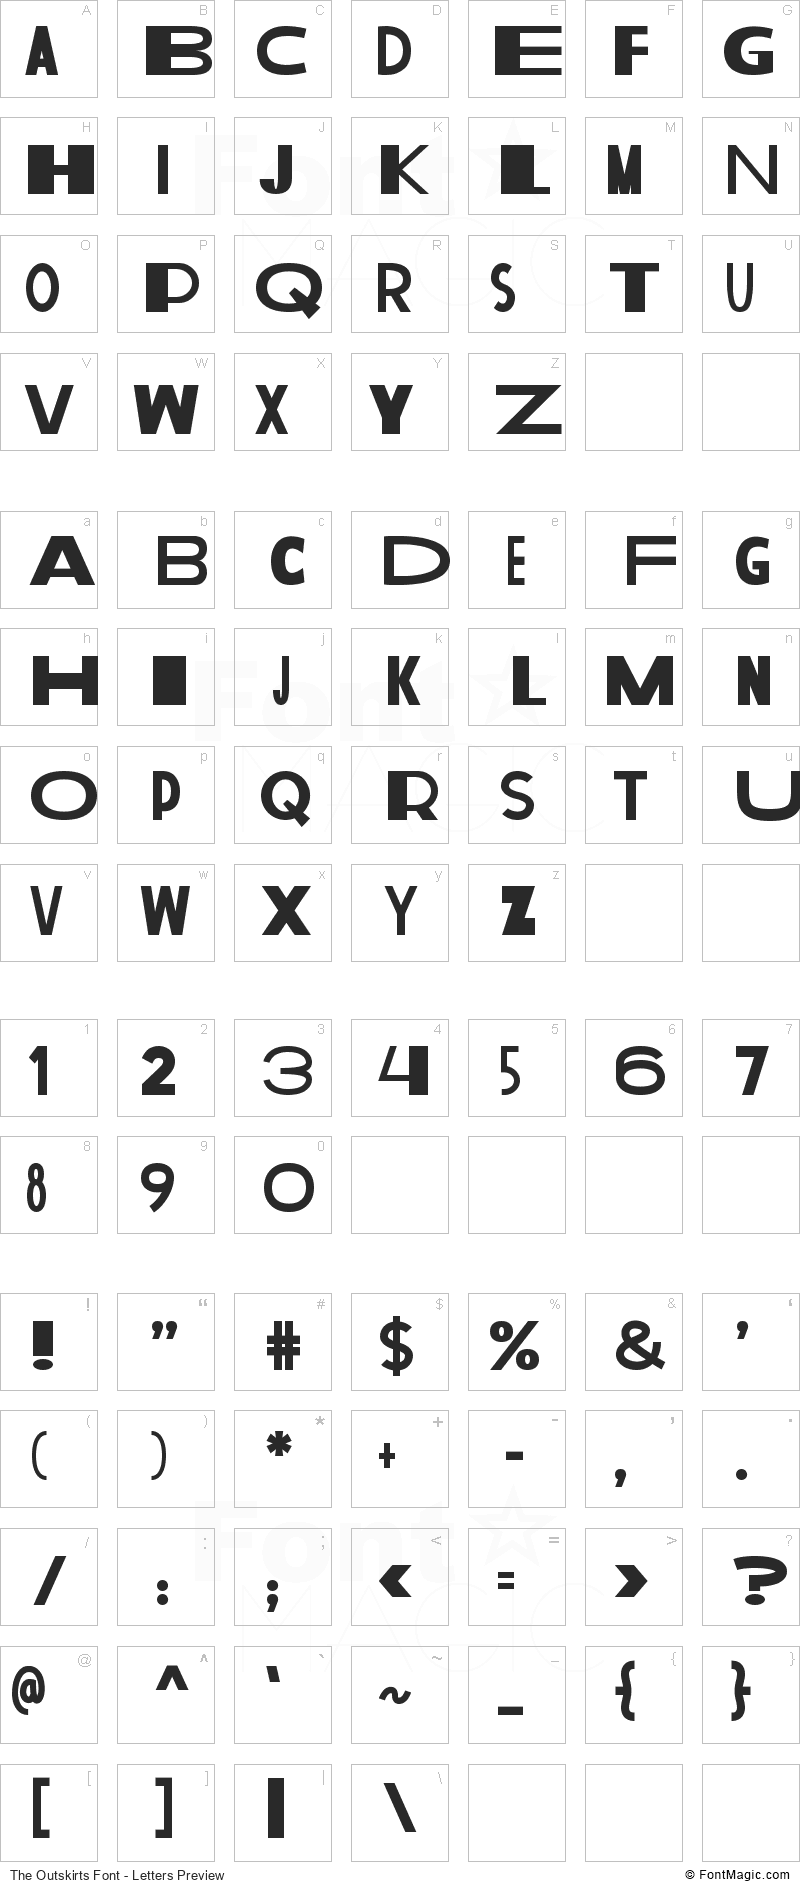 The Outskirts Font - All Latters Preview Chart